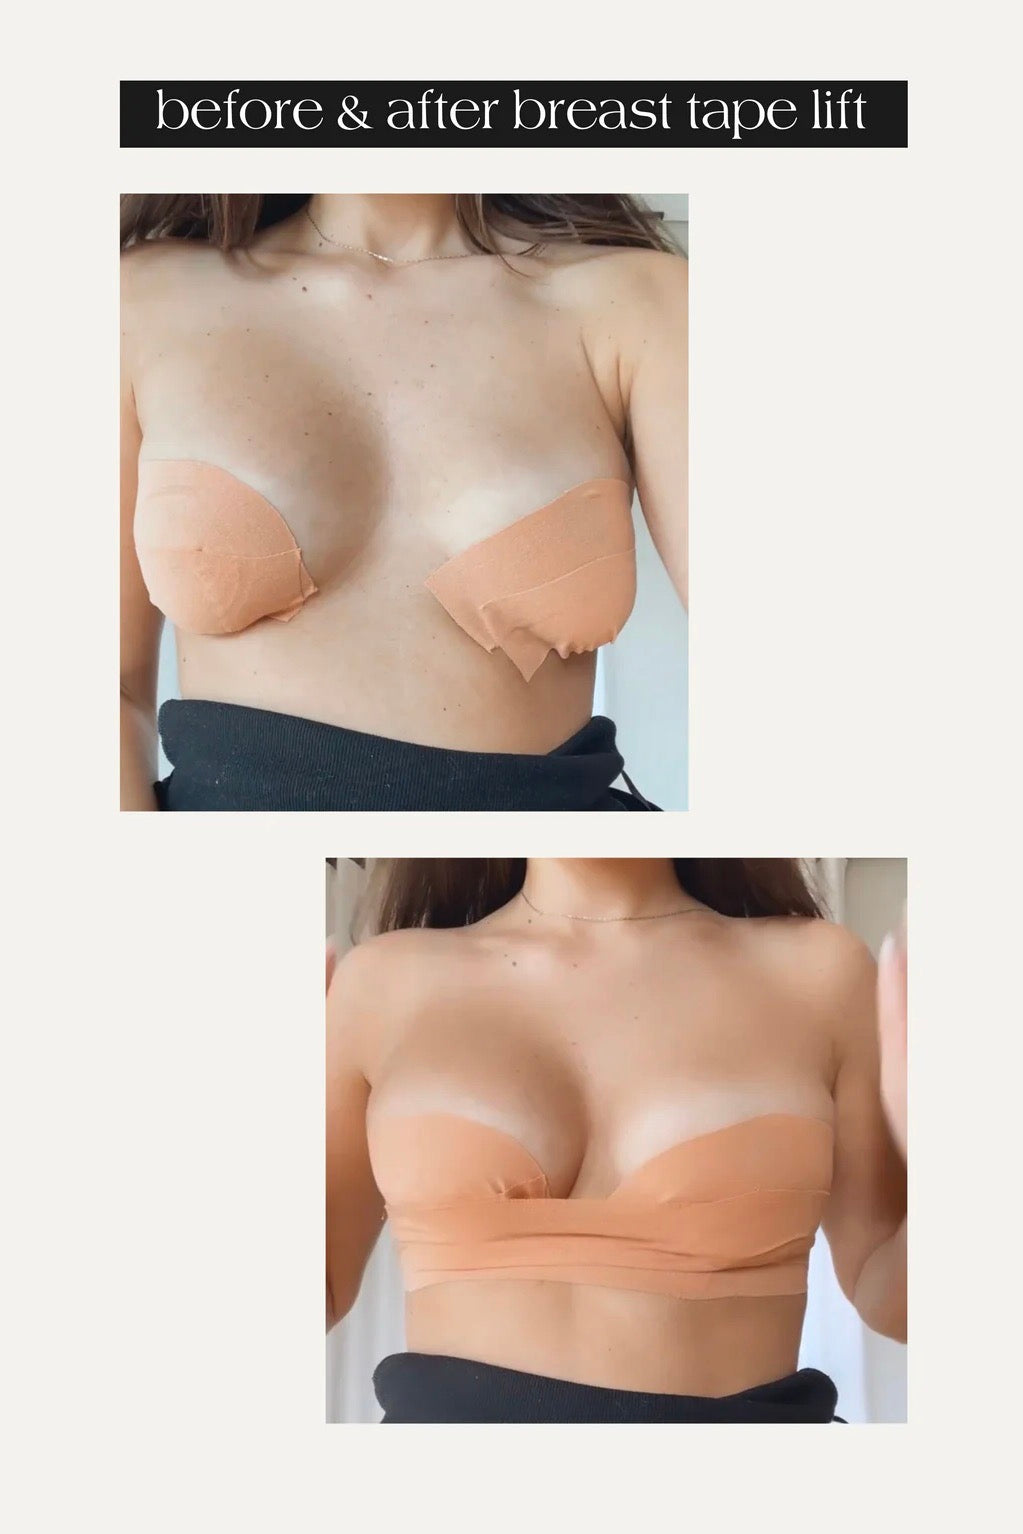 Boob Tape: bathing suit how to apply videos for every style